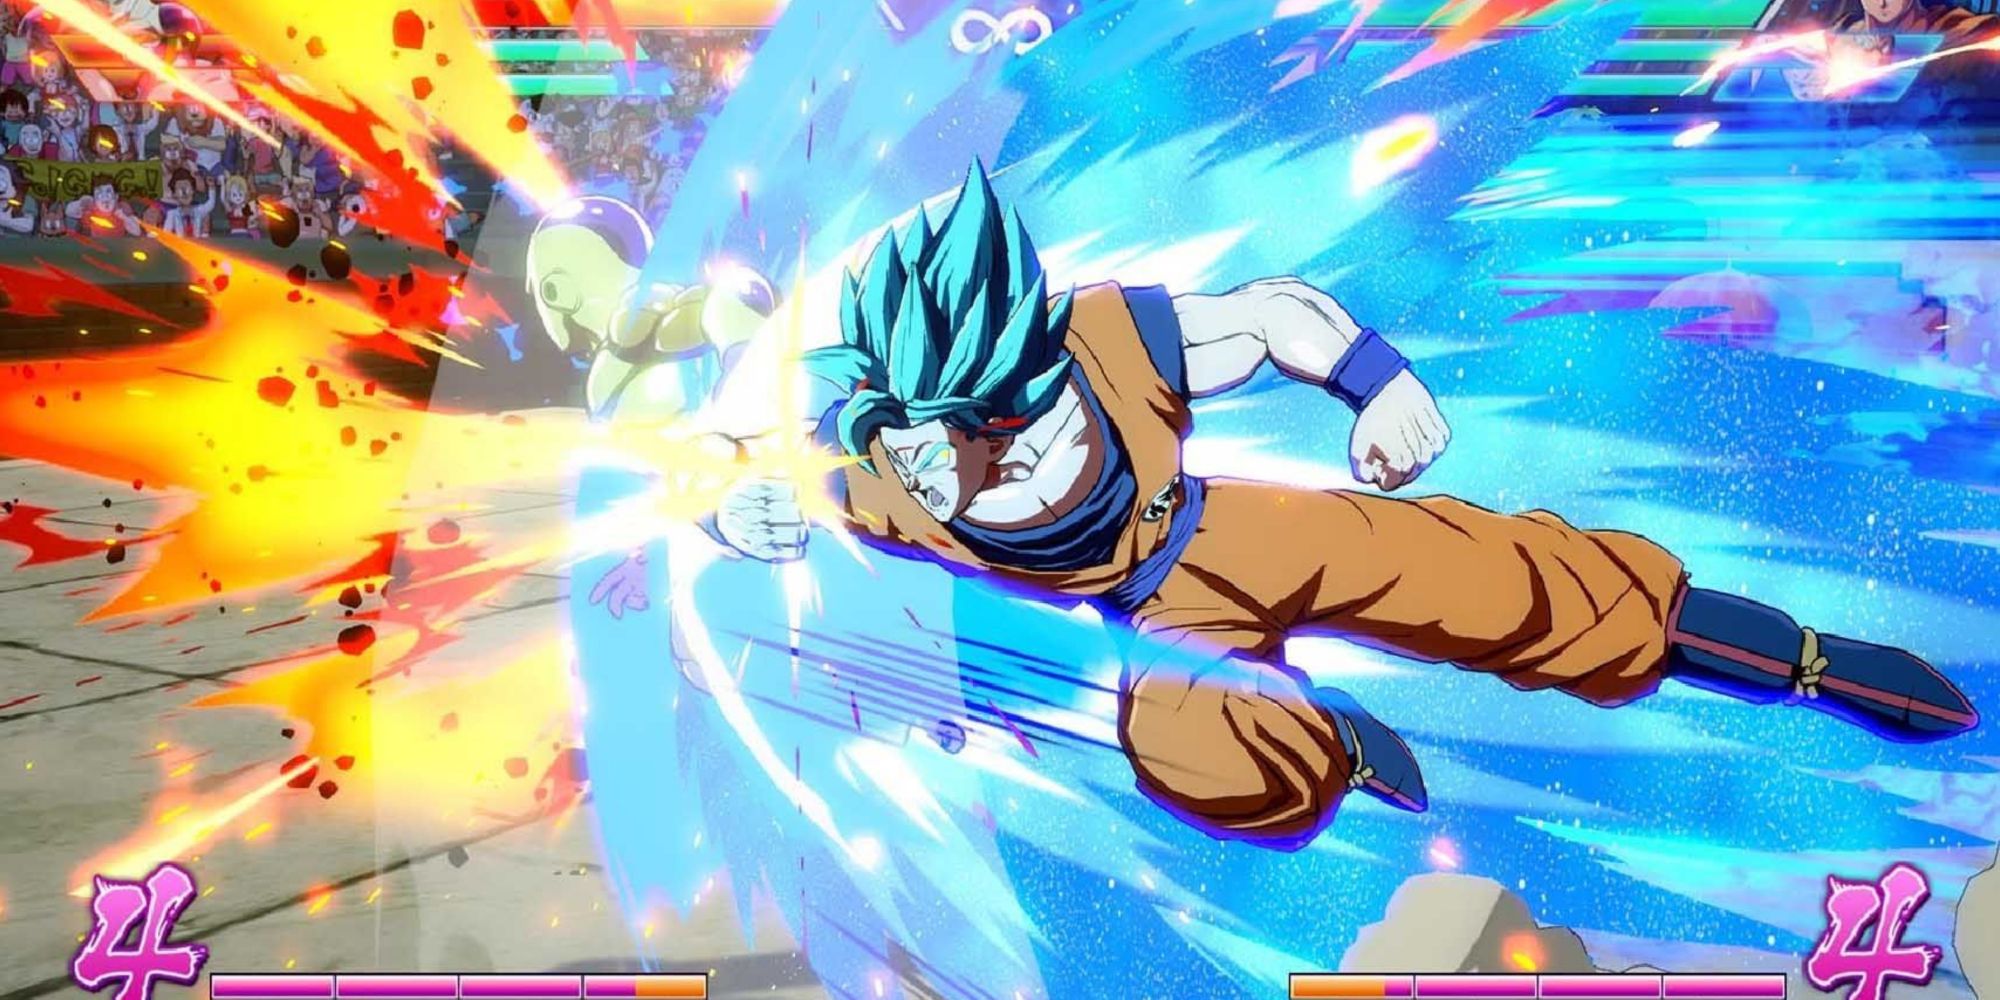 Goku delivering a massive attack in Dragon Ball FighterZ